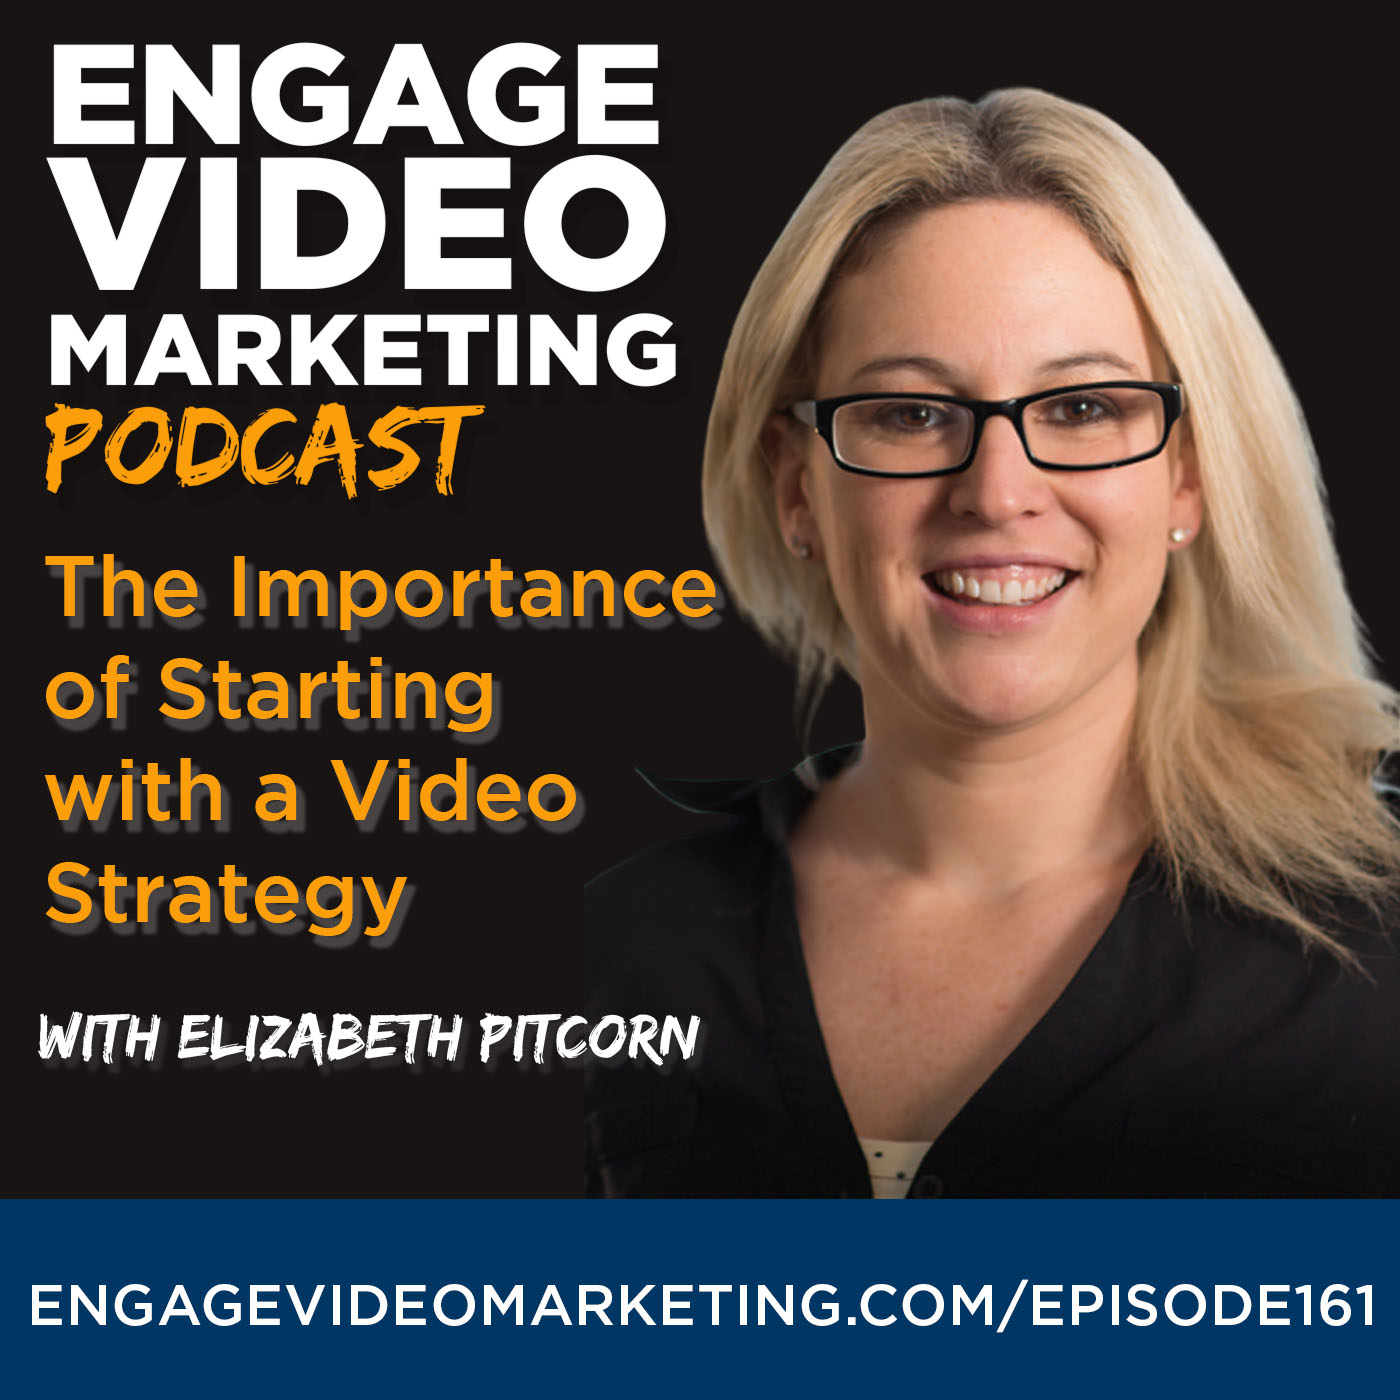 The Importance of Starting with a Video Strategy with Elizabeth Pitcorn